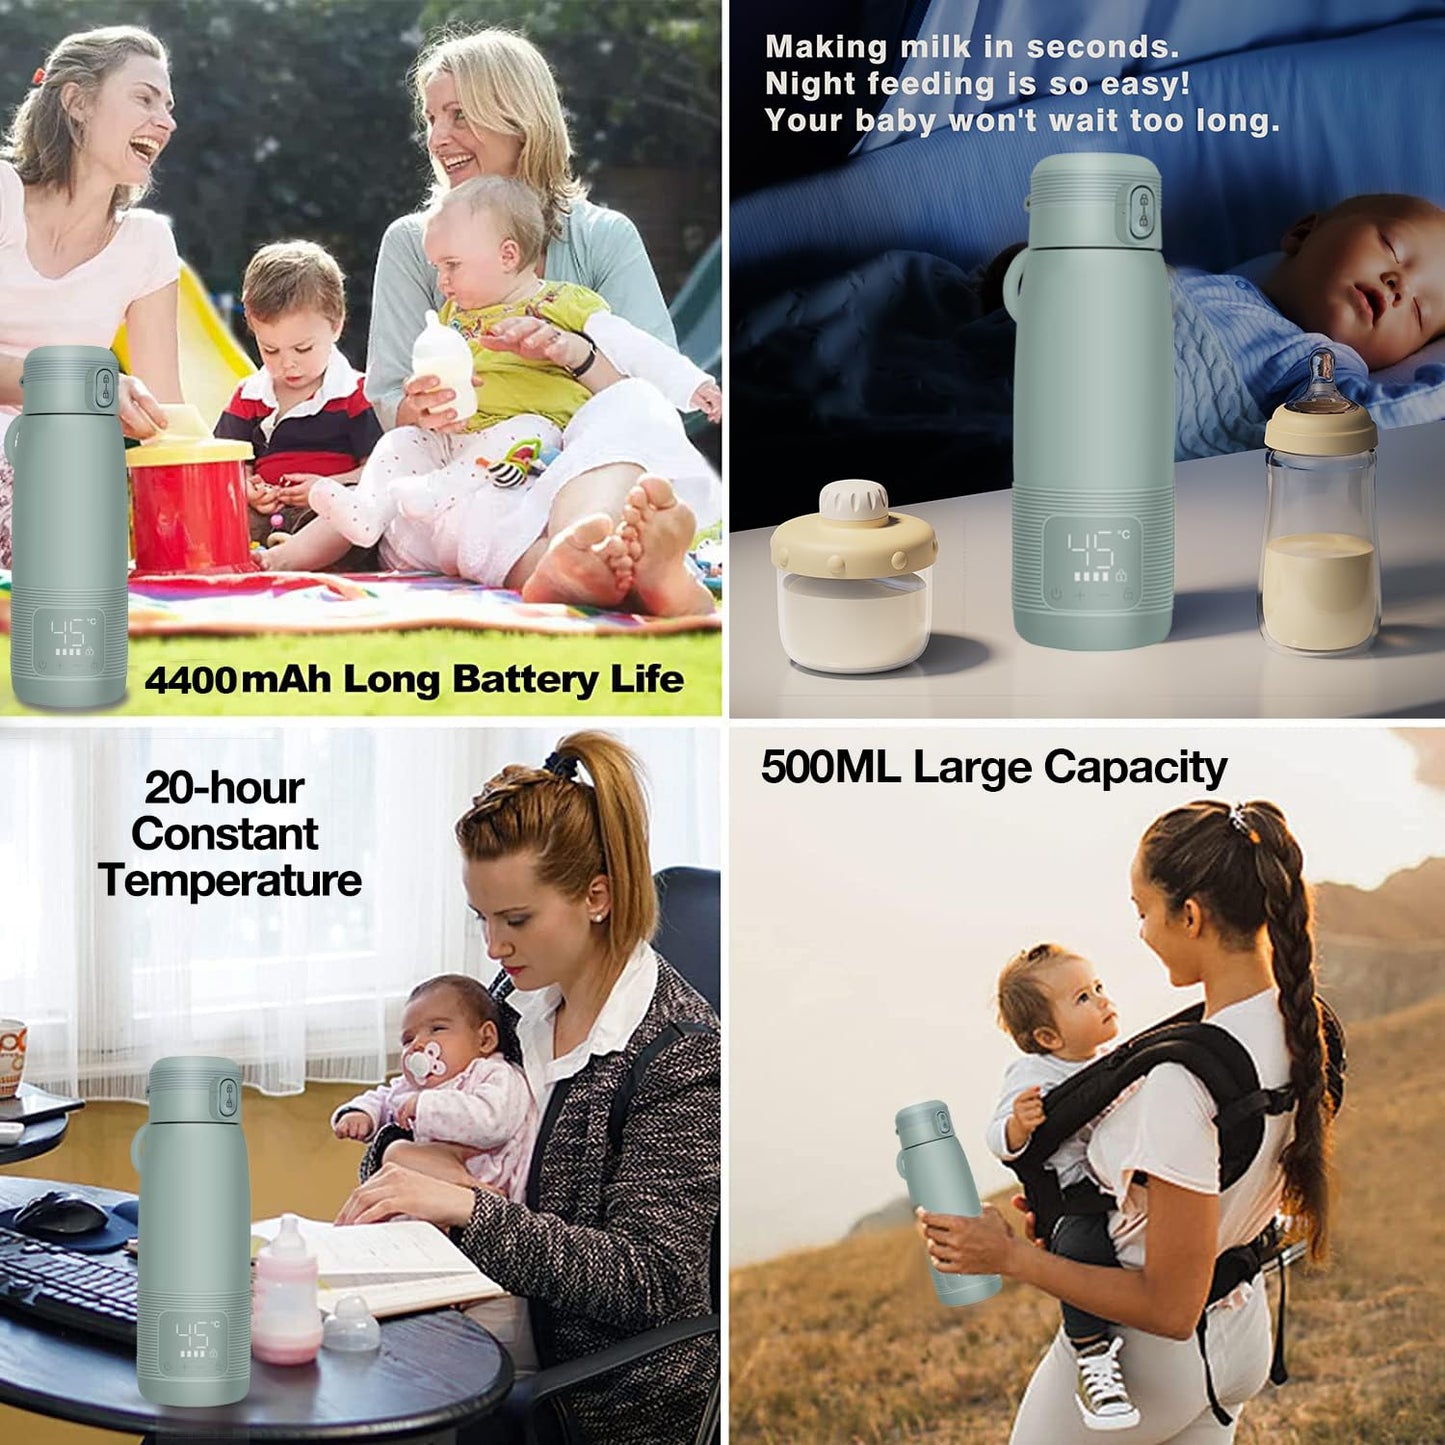 Portable Bottle Warmer for Water Baby Milk Formula, 17 Ounce, Cordless Travel Car Bottle Warmer, USB Fast Charging, Baby Bottle Warmer Thermos Cup On The Go, 500ML